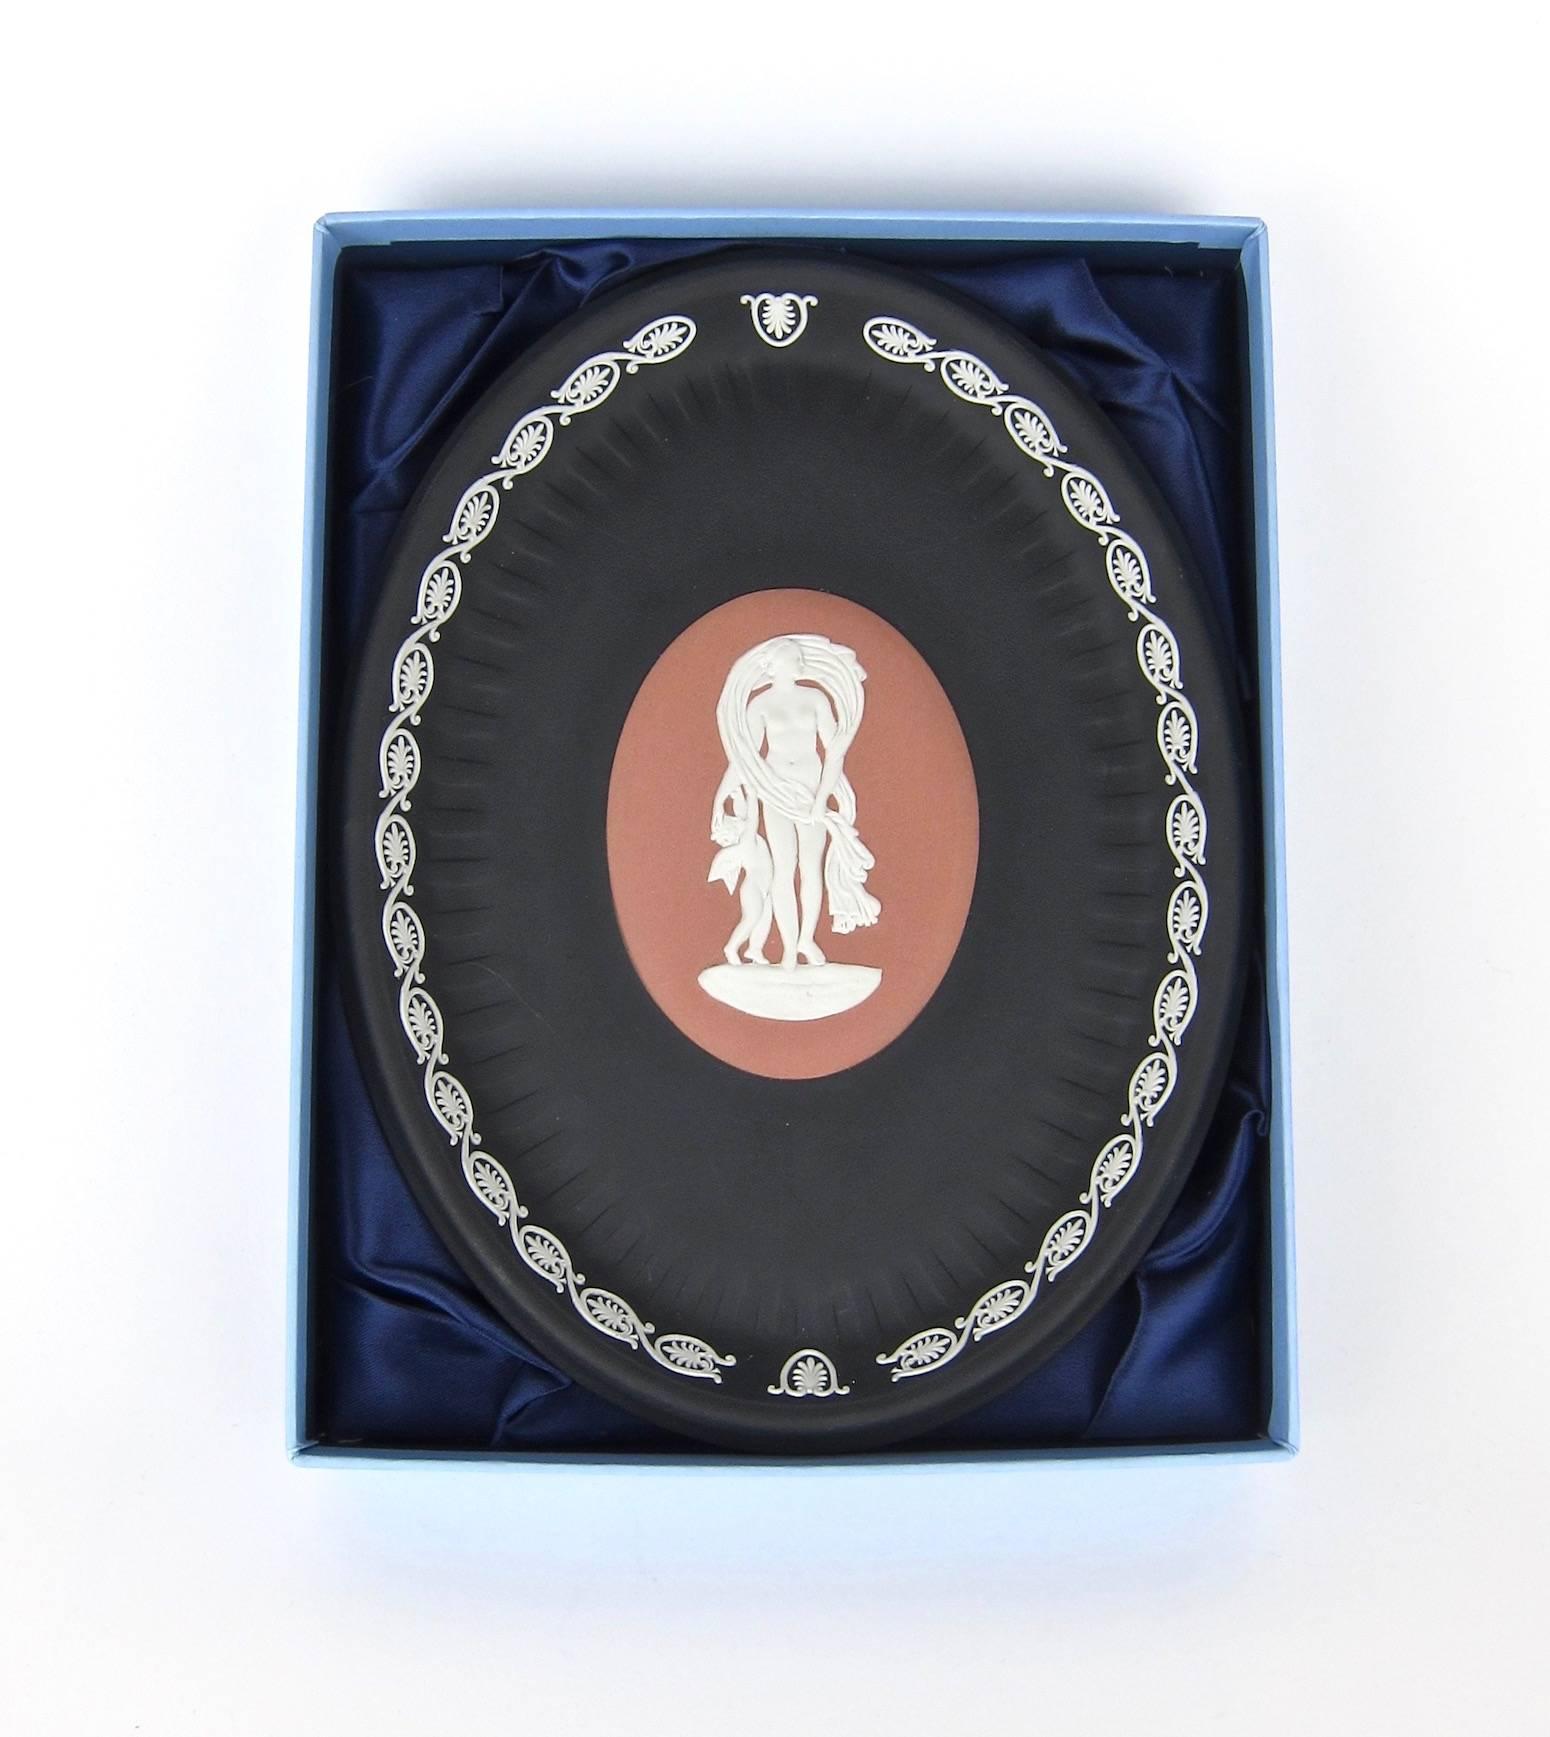 A handsome 'Venus and Cupid' oval tray with a satin lined and fitted box, signed by Lord Wedgwood in 2002. The tray is decorated in the Classical style with white bas relief jasper figures on an oval terra cotta central medallion, surrounded by